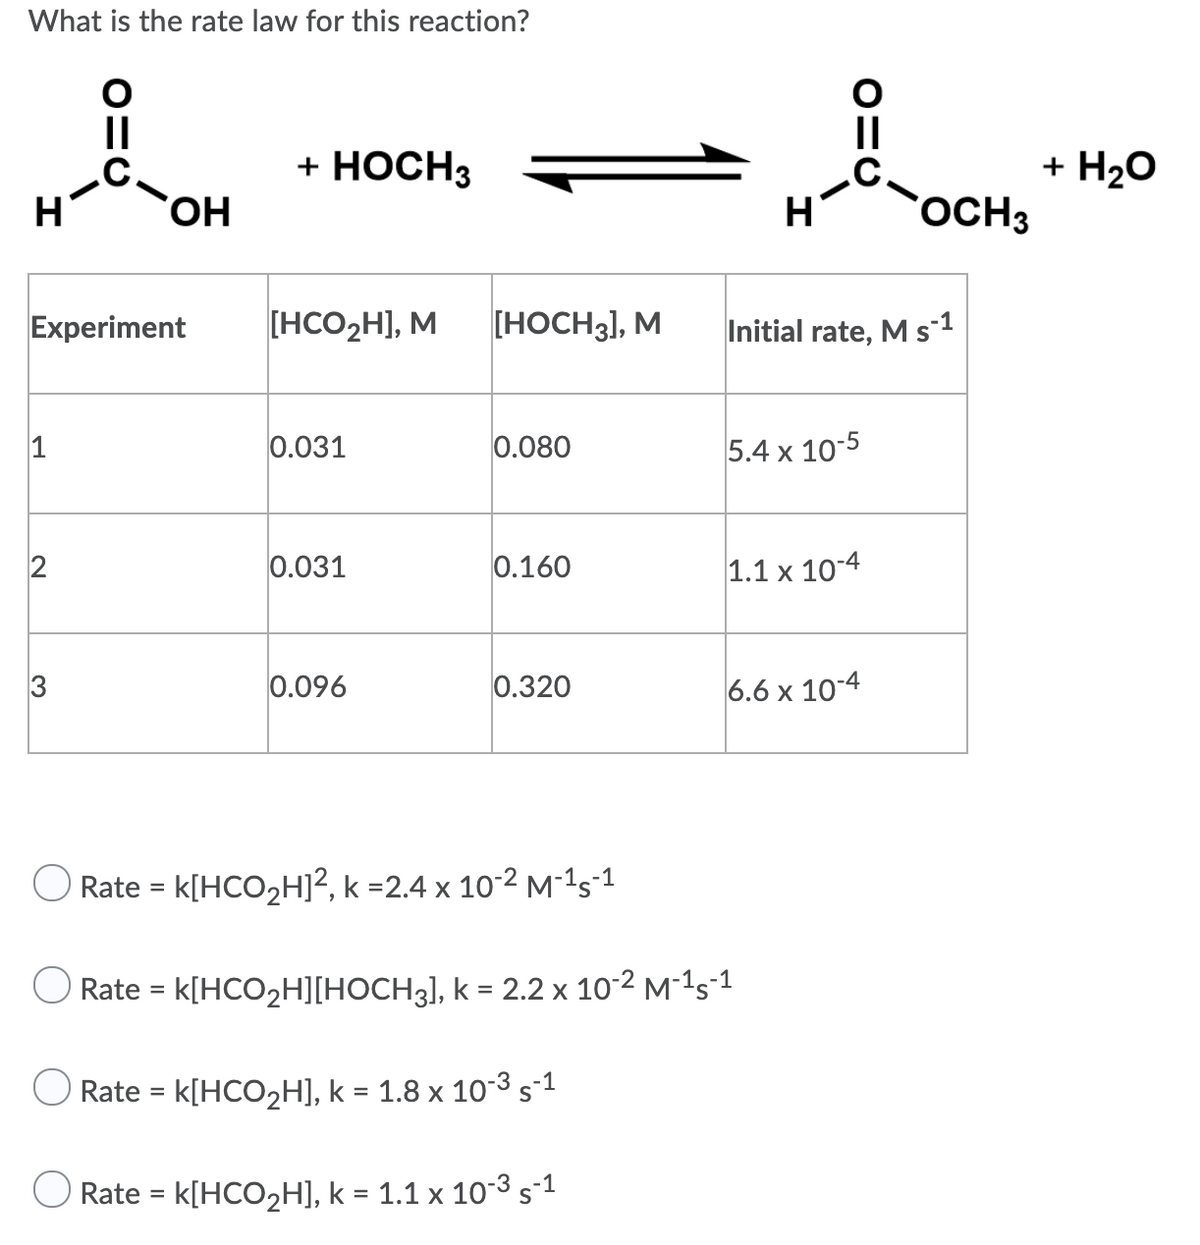 What is the rate law for this reaction?
II
+ HOCH3
+ H20
HO,
OCH3
Experiment
[HCO2H], M
[HOCH3], M
Initial rate, M s-1
1
0.031
0.080
5.4 x 10-5
0.031
0.160
1.1 x 10-4
0.096
0.320
6.6 x 10-4
Rate = k[HCO2H]², k =2.4 x 10-2 M-1s°1
%3D
Rate %3D k[HCO2H)ІНОСН;|, k %3D 2.2 х 10:2 м-15-1
Rate = k[HCO2H], k = 1.8 x 10-3 s-1
O Rate = k[HCO2H], k = 1.1 x 10-3 s-1
O=U
